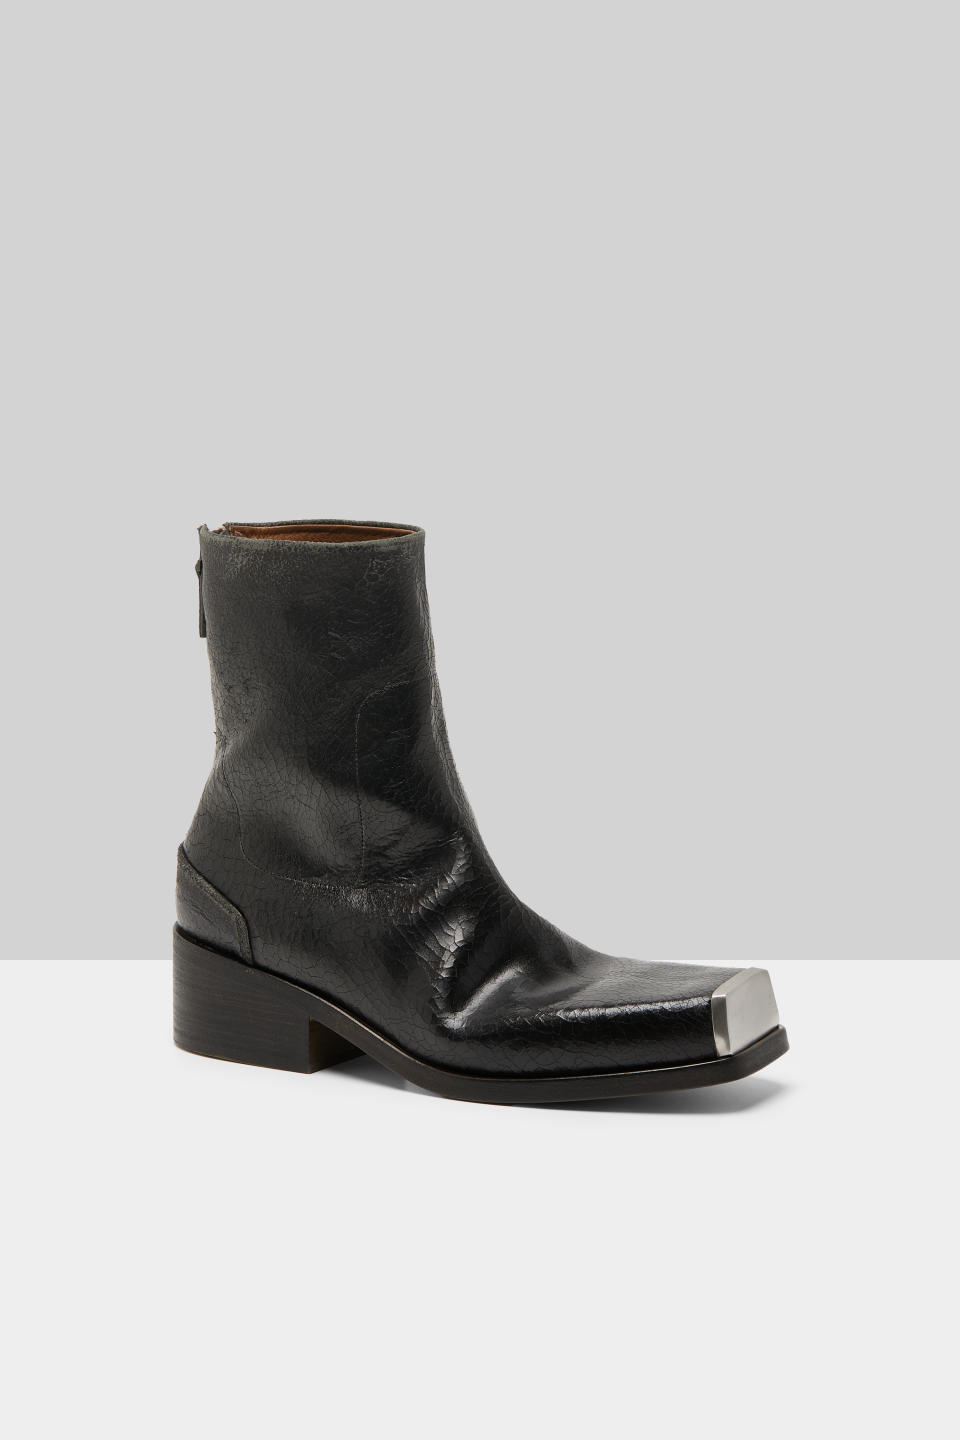 The limited-edition Casello boot created for the pop-up.